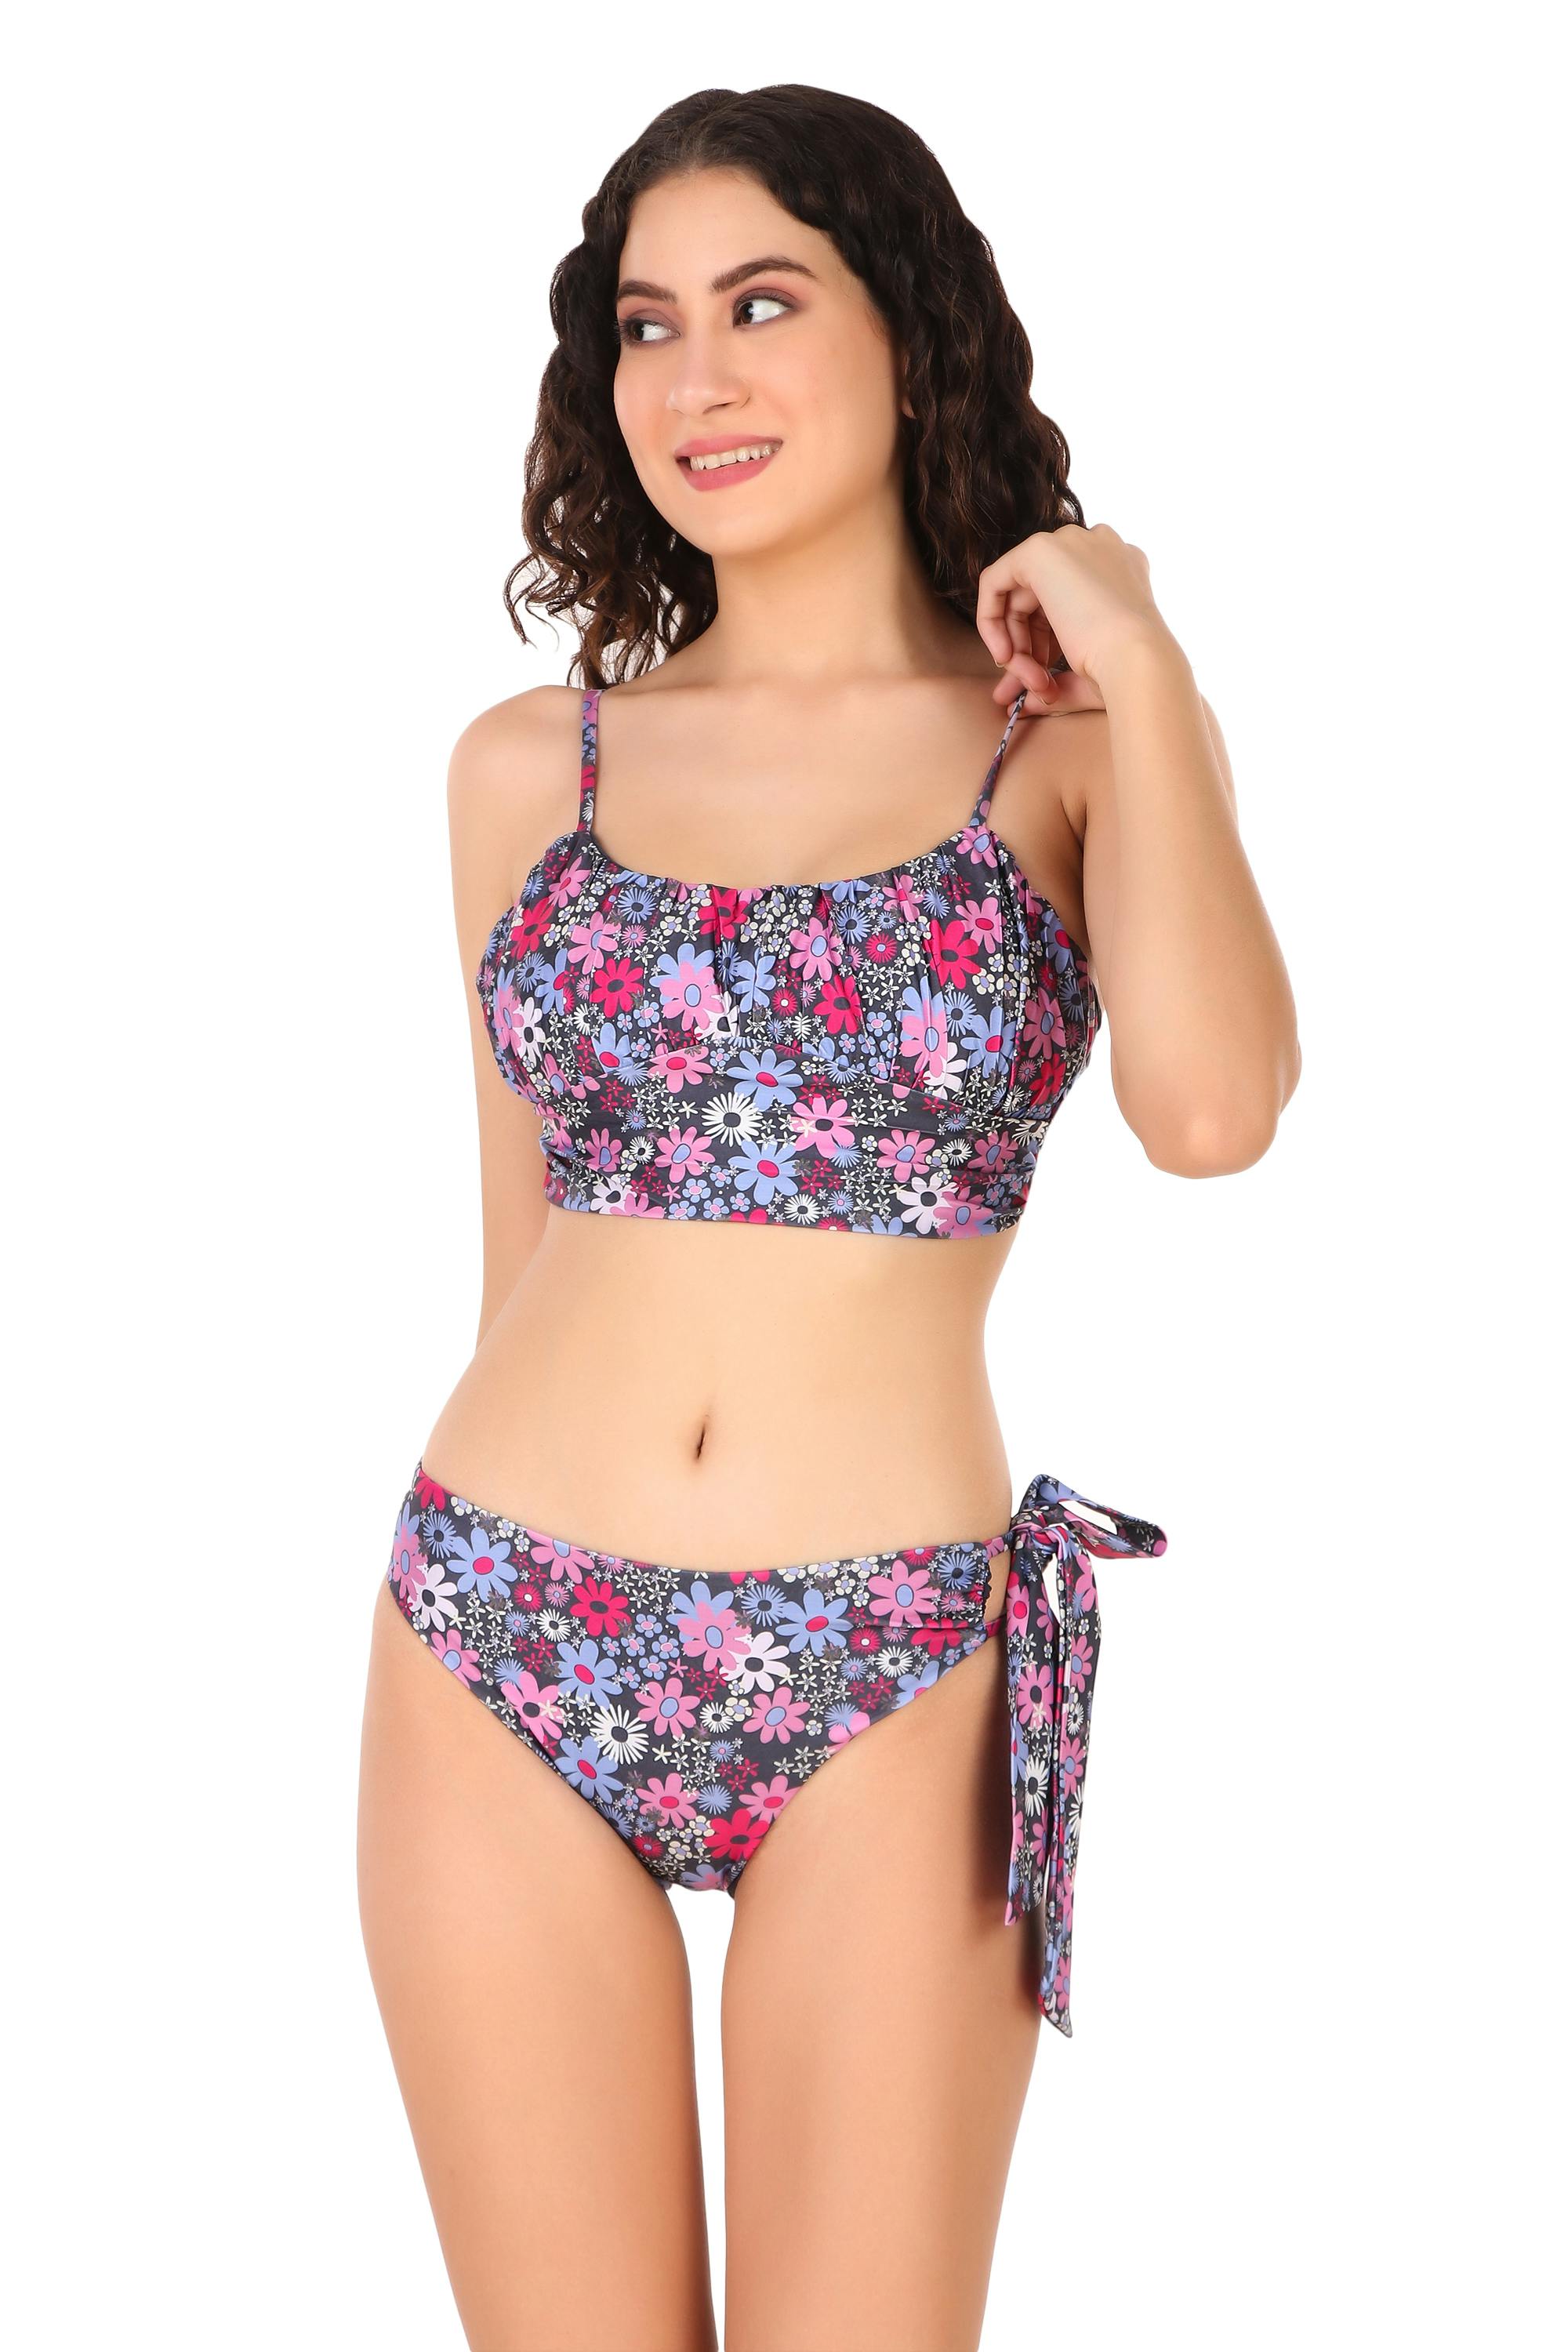 Ruched Bikini Set - Retro Floral Bliss, a product by LUAM